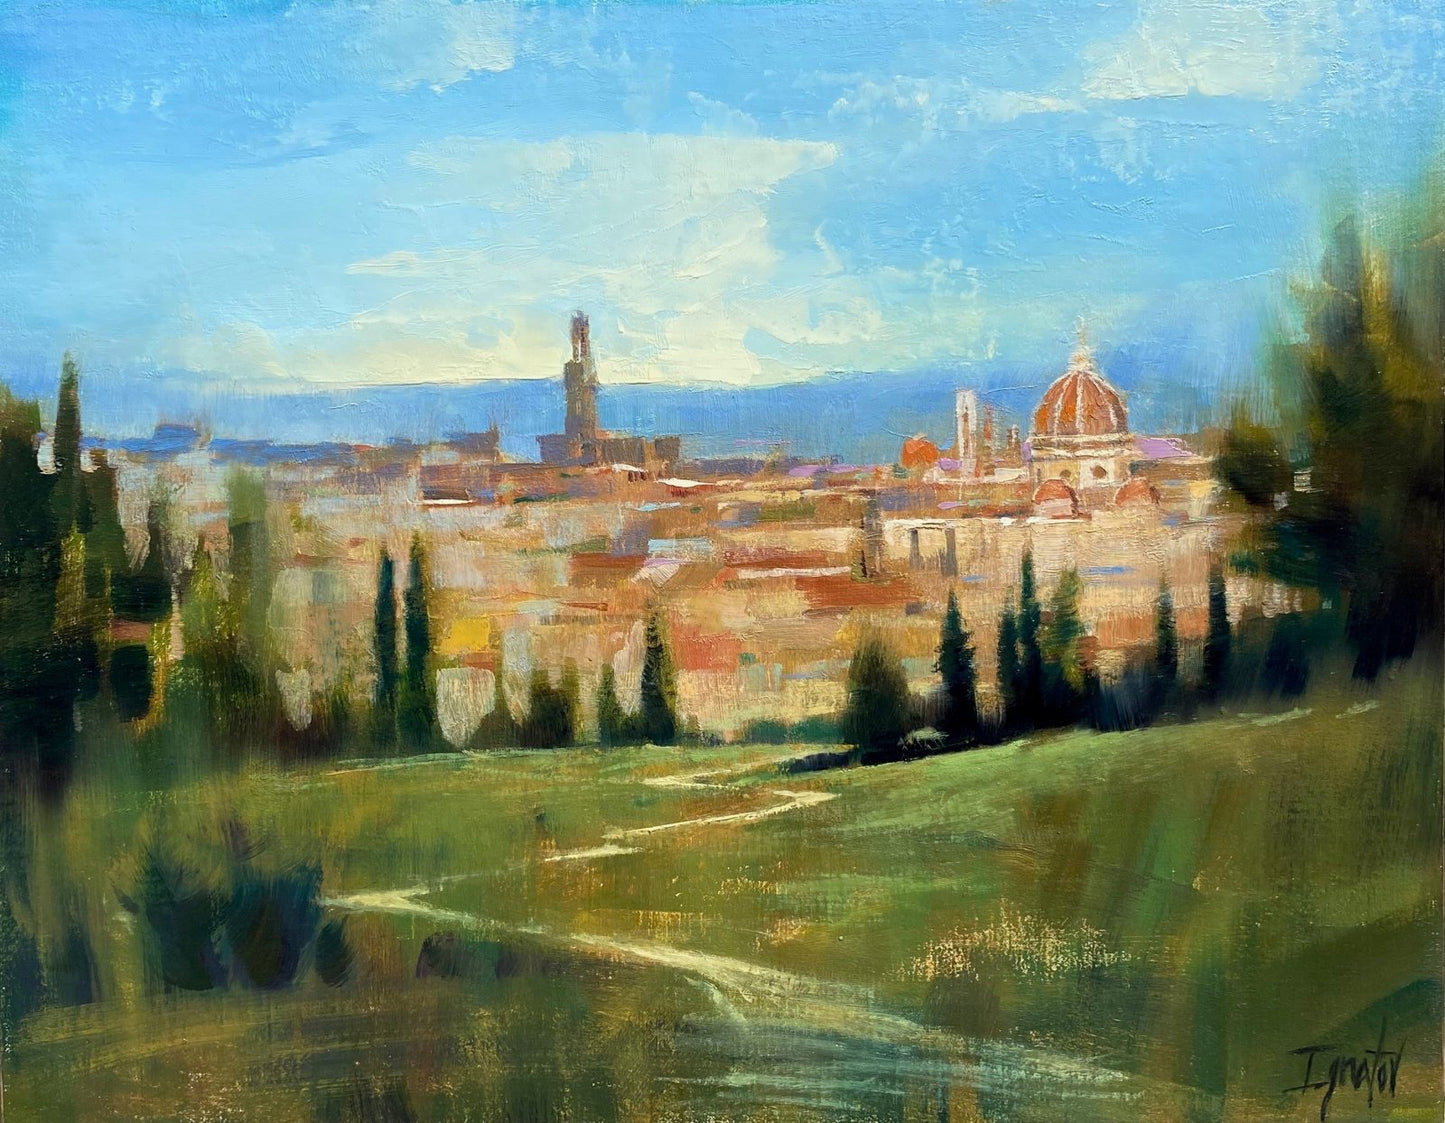 Florence, Italy by Ignat Ignatov at LePrince Galleries